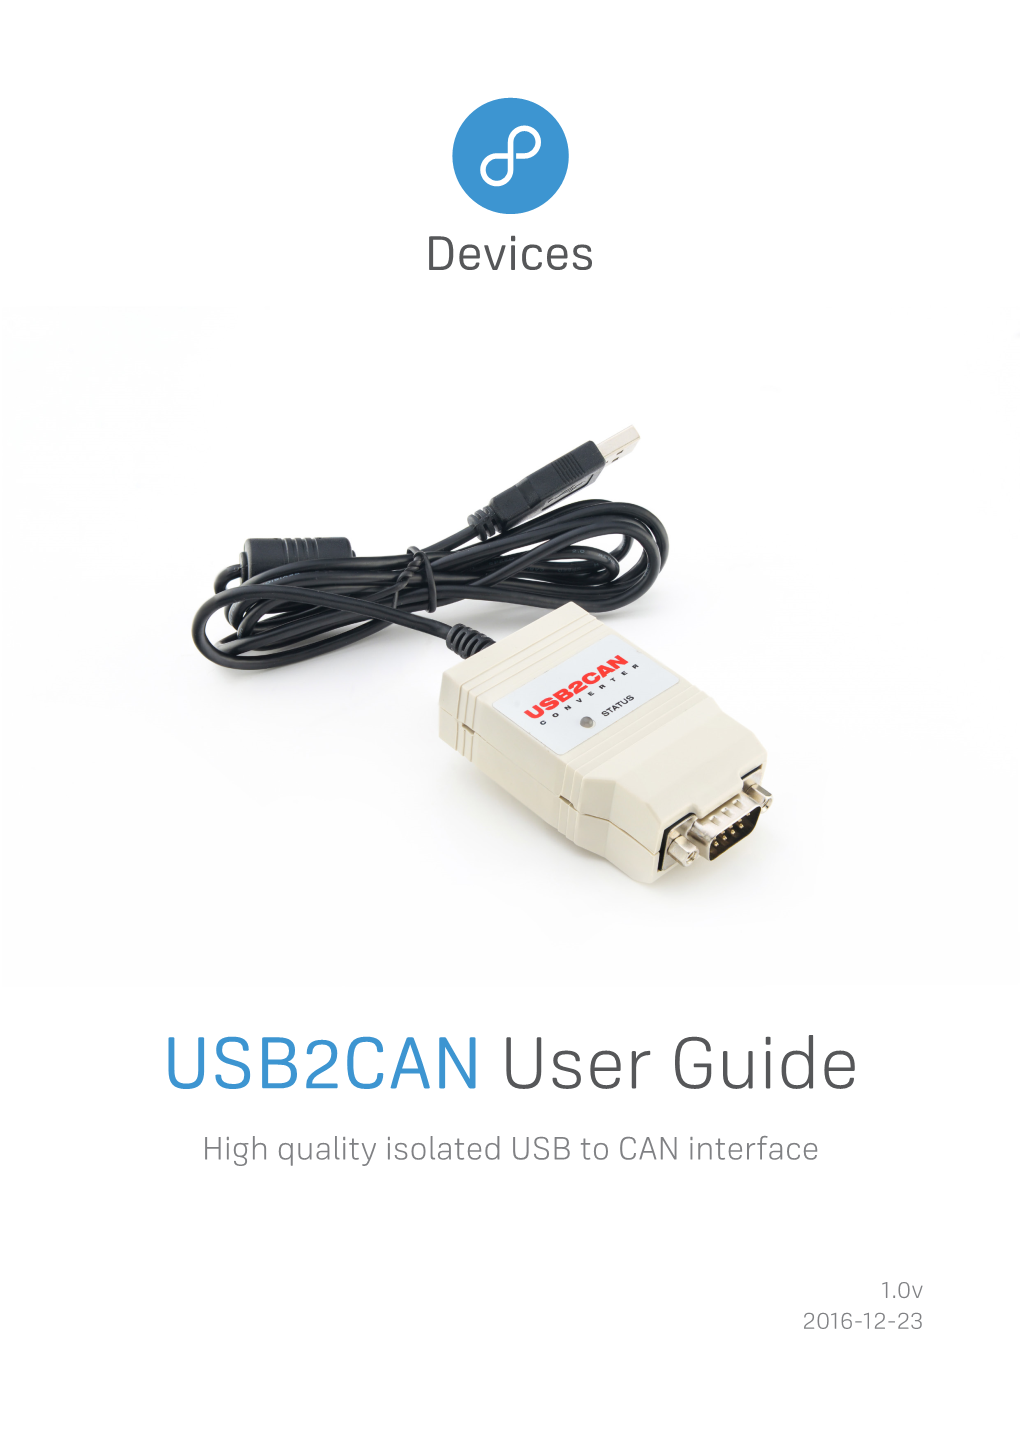 USB2CAN User Guide High Quality Isolated USB to CAN Interface